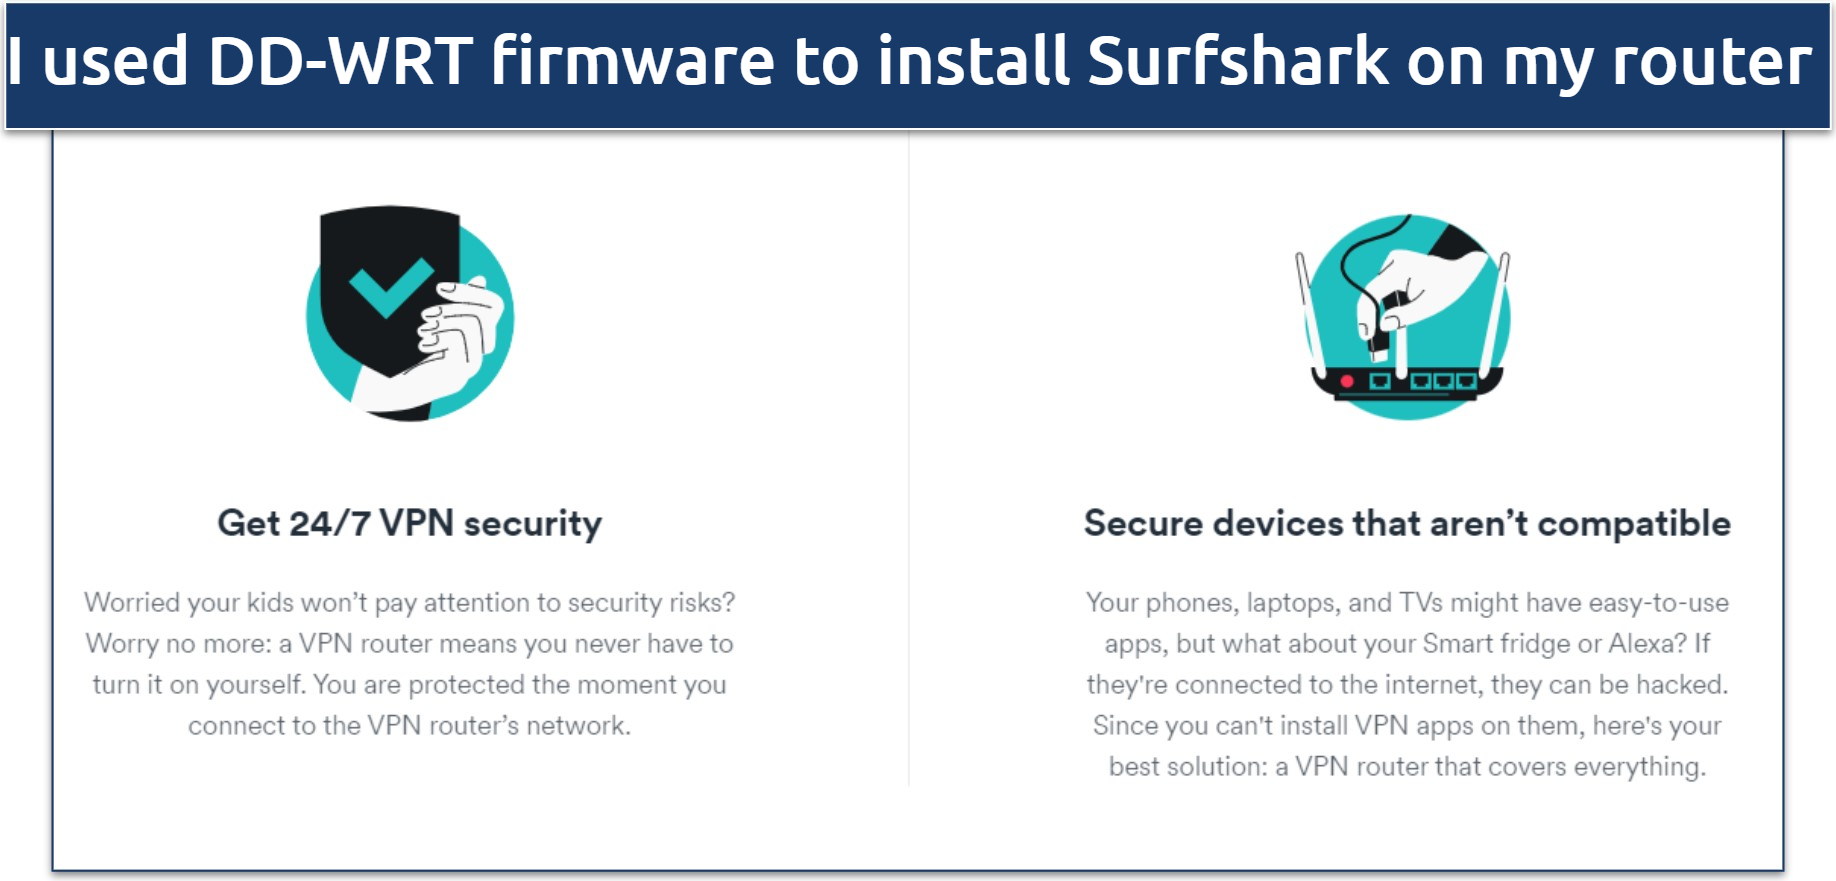 Screenshot about Surfshark's strong VPN security on routers